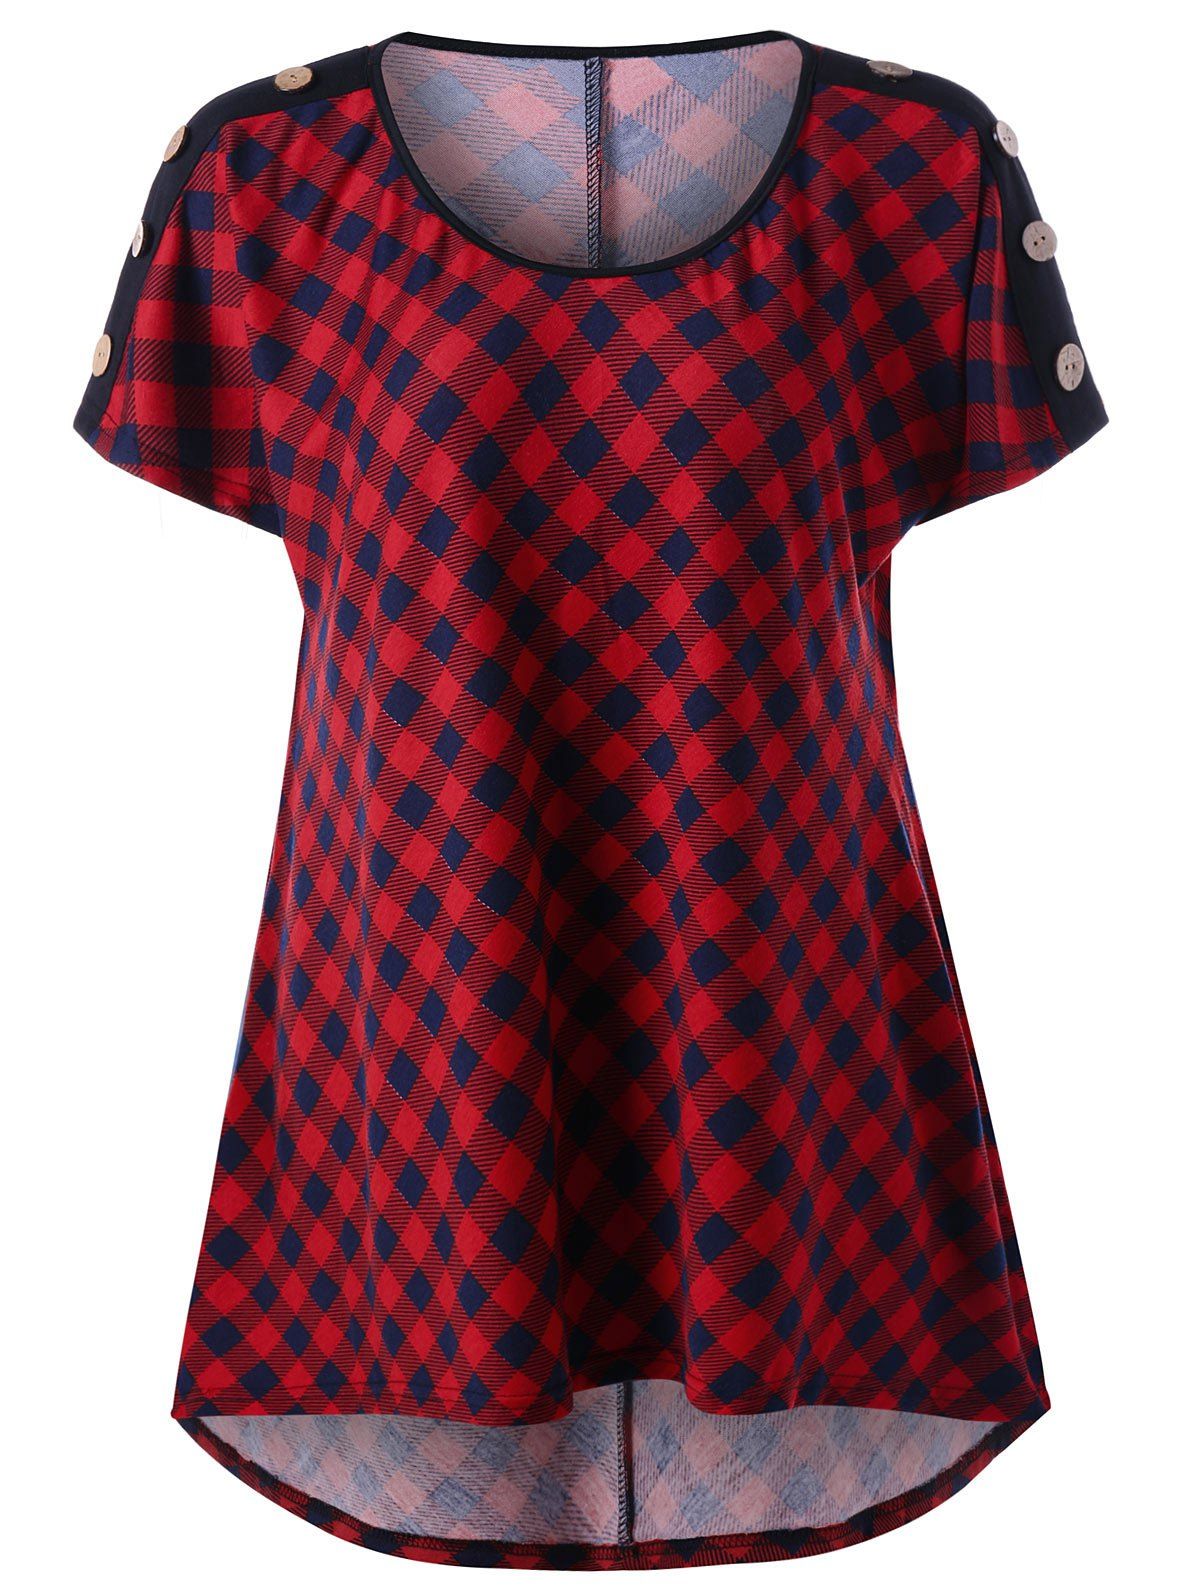  41 OFF 2019 Plus  Size  Plaid T Shirt  With Button In RED  